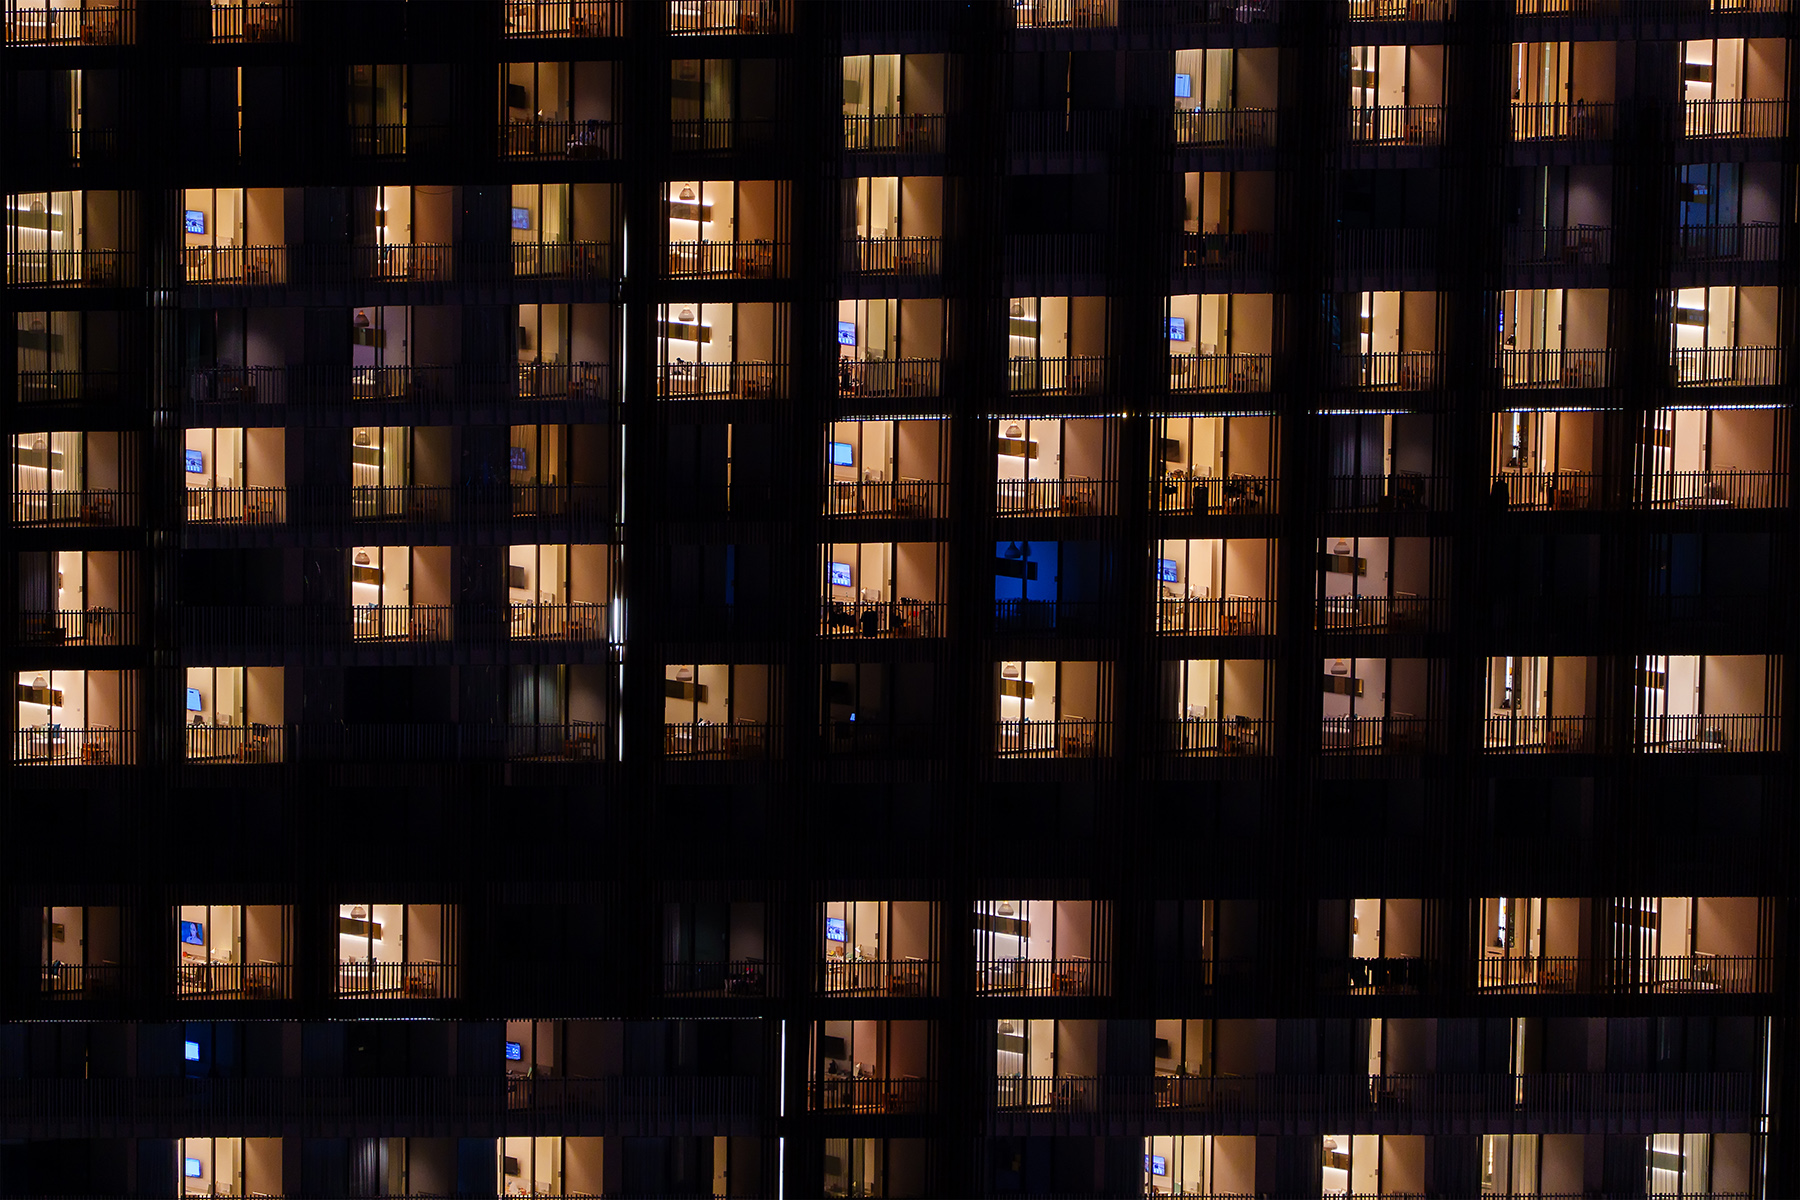 Illuminated windows of an apartment building in Thailand


